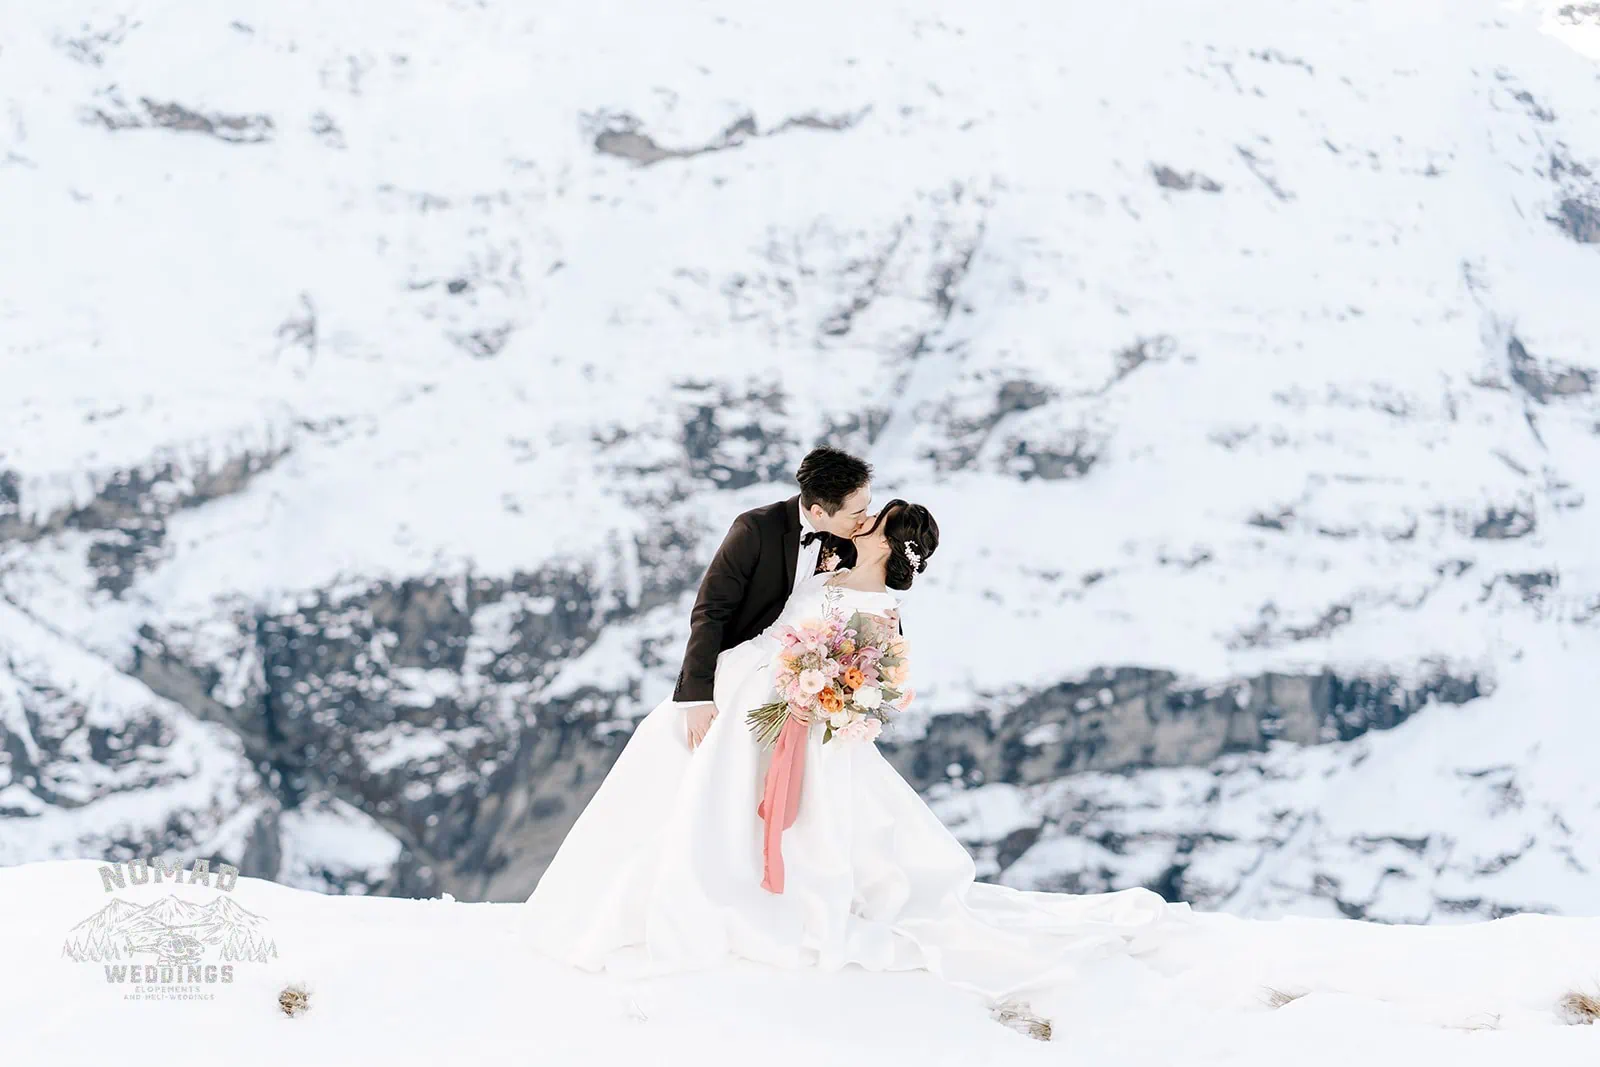 Queenstown New Zealand Elopement Wedding Photographer - A couple named Bo and Junyi share a kiss during their heli pre wedding shoot on a snow covered mountain with 4 landings.